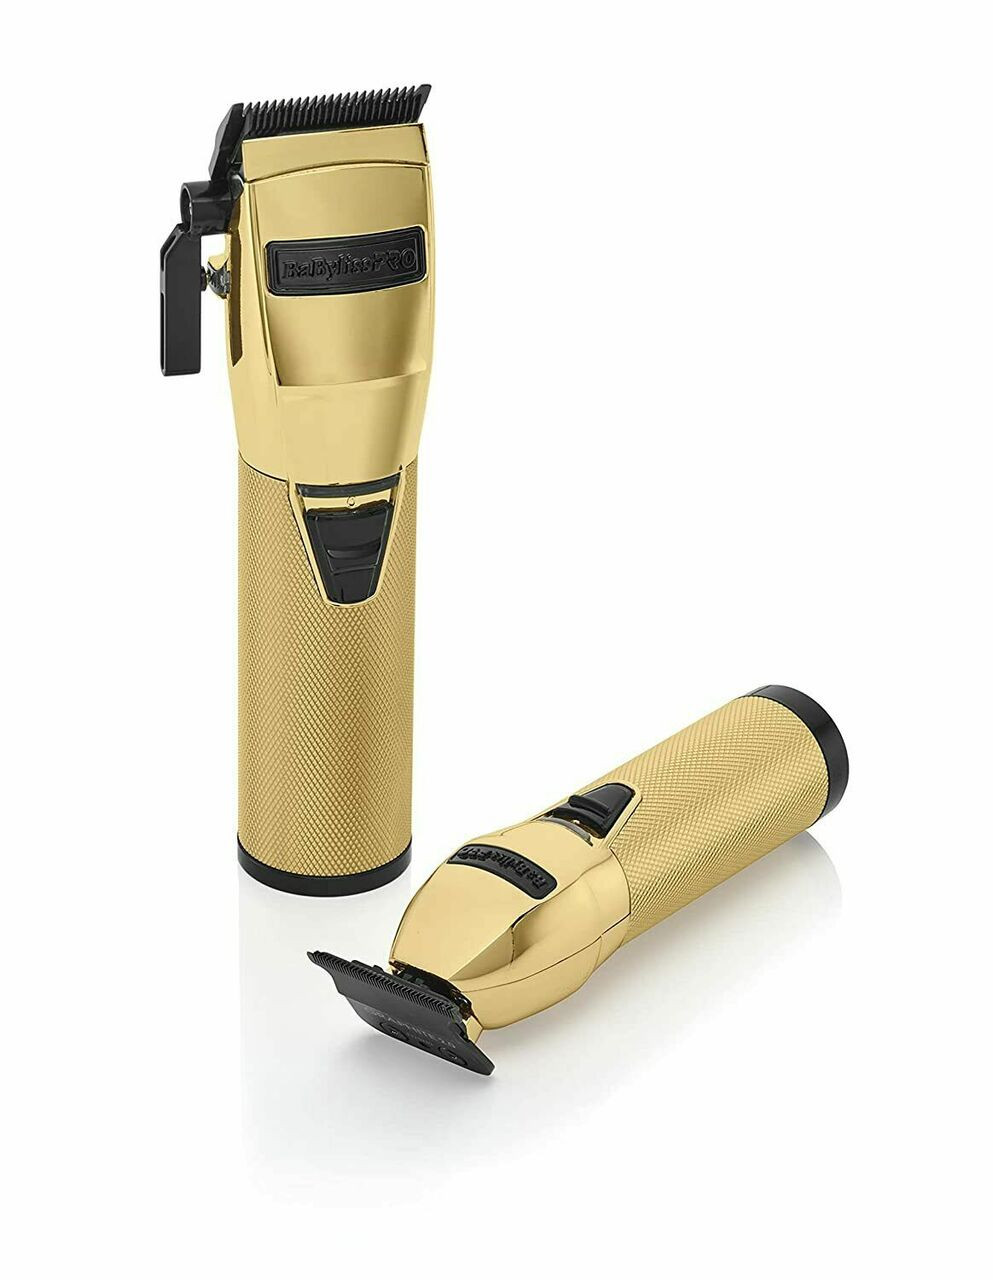 BaByliss PRO Gold FX Clipper, Trimmer, Shaver Combo